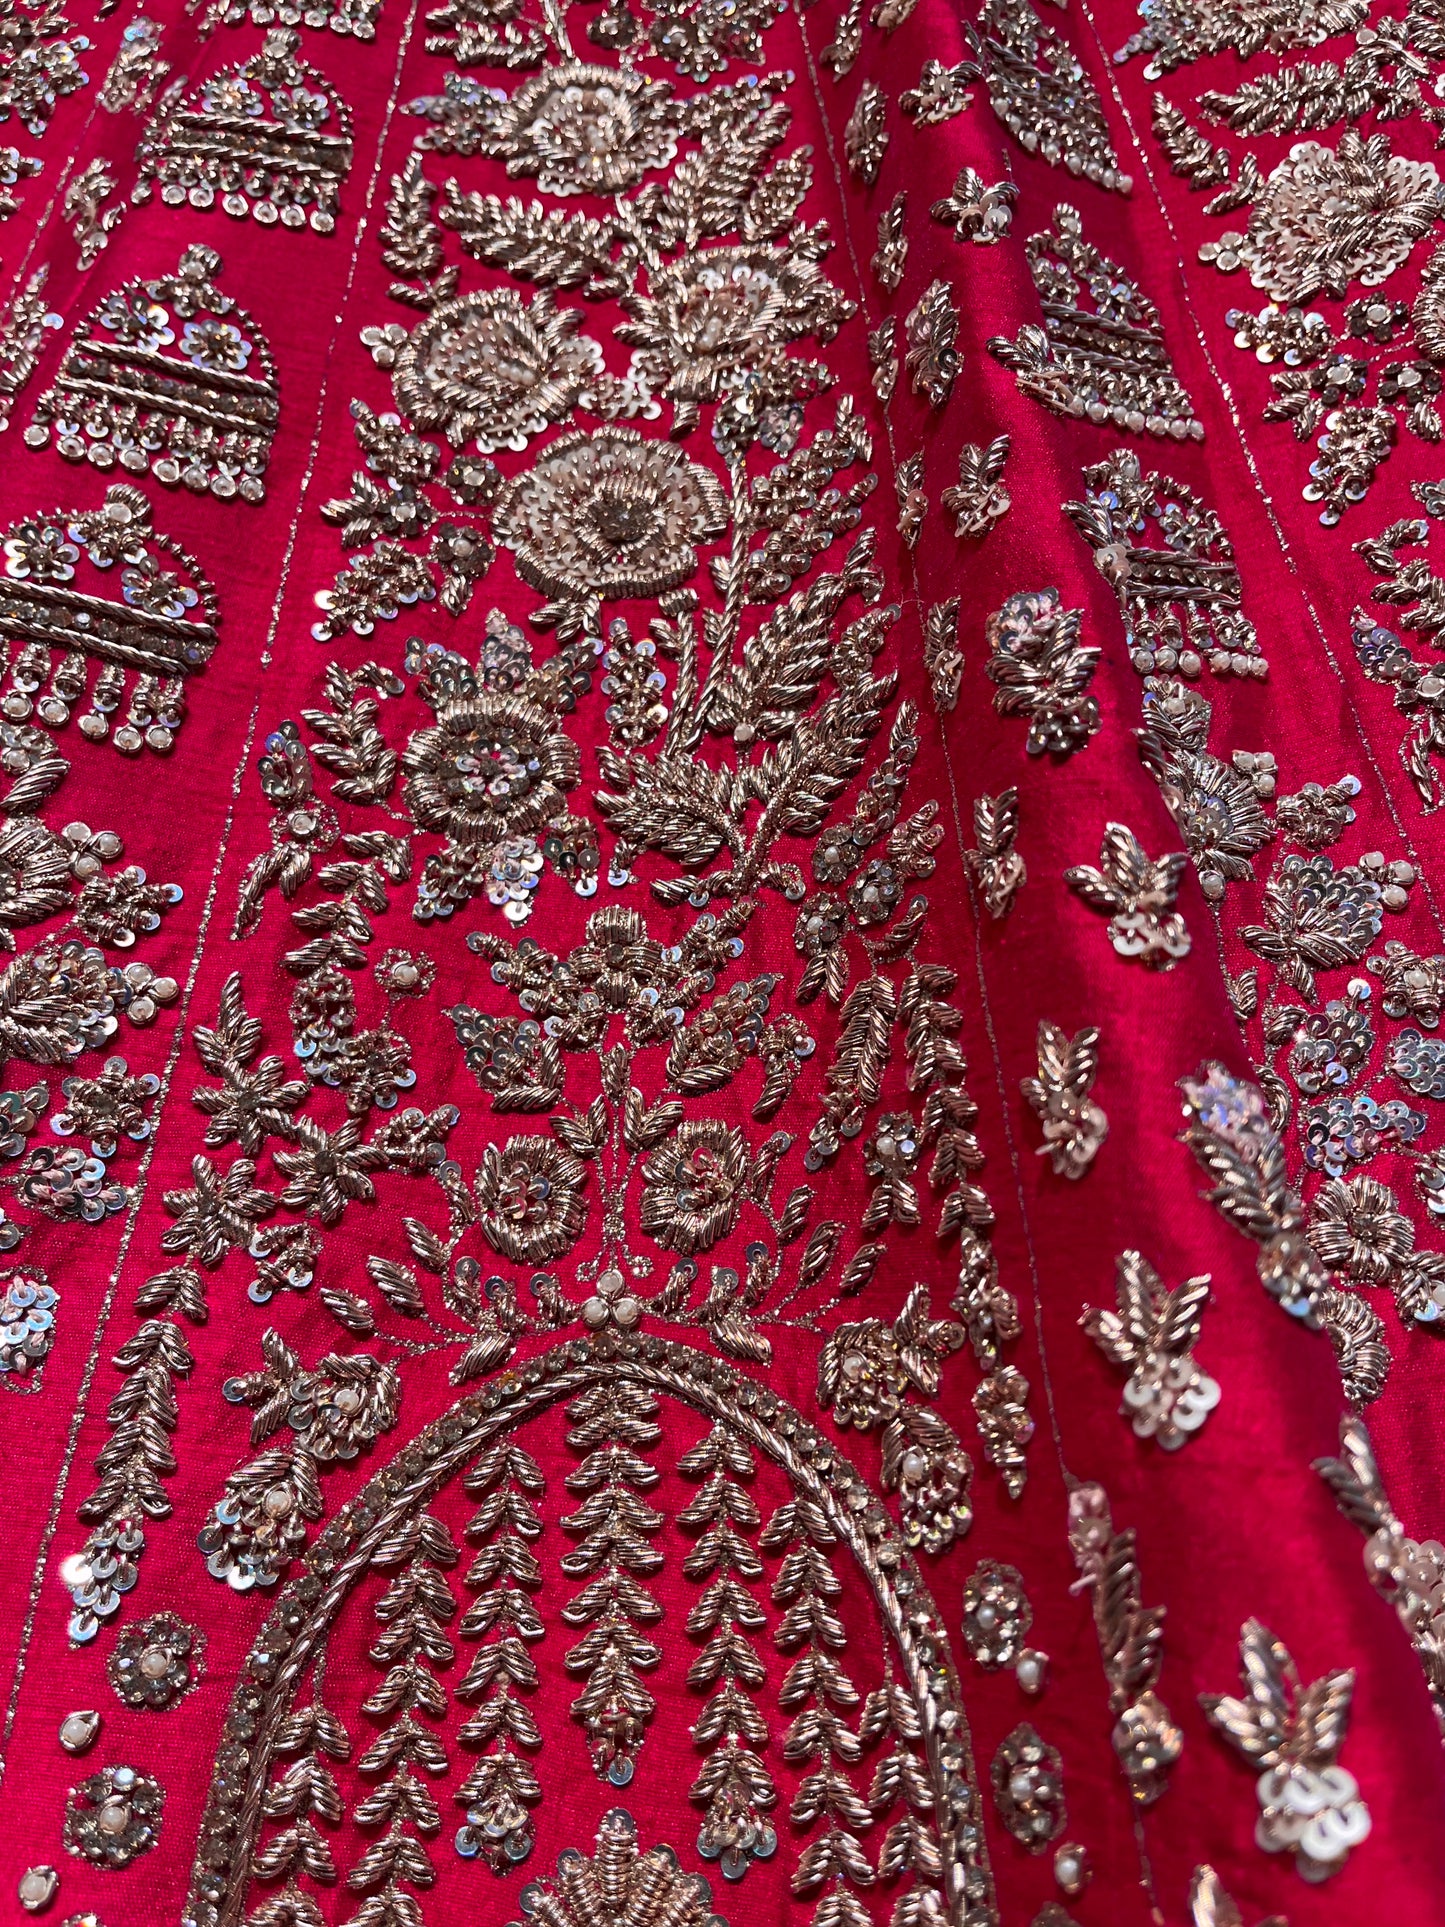 RANI COLOUR BRIDAL HAND EMBROIDERED LEHENGA WITH UNSTITCHED BLOUSE & ORGANZA DUPATTA EMBELLISHED WITH ZARDOZI WORK